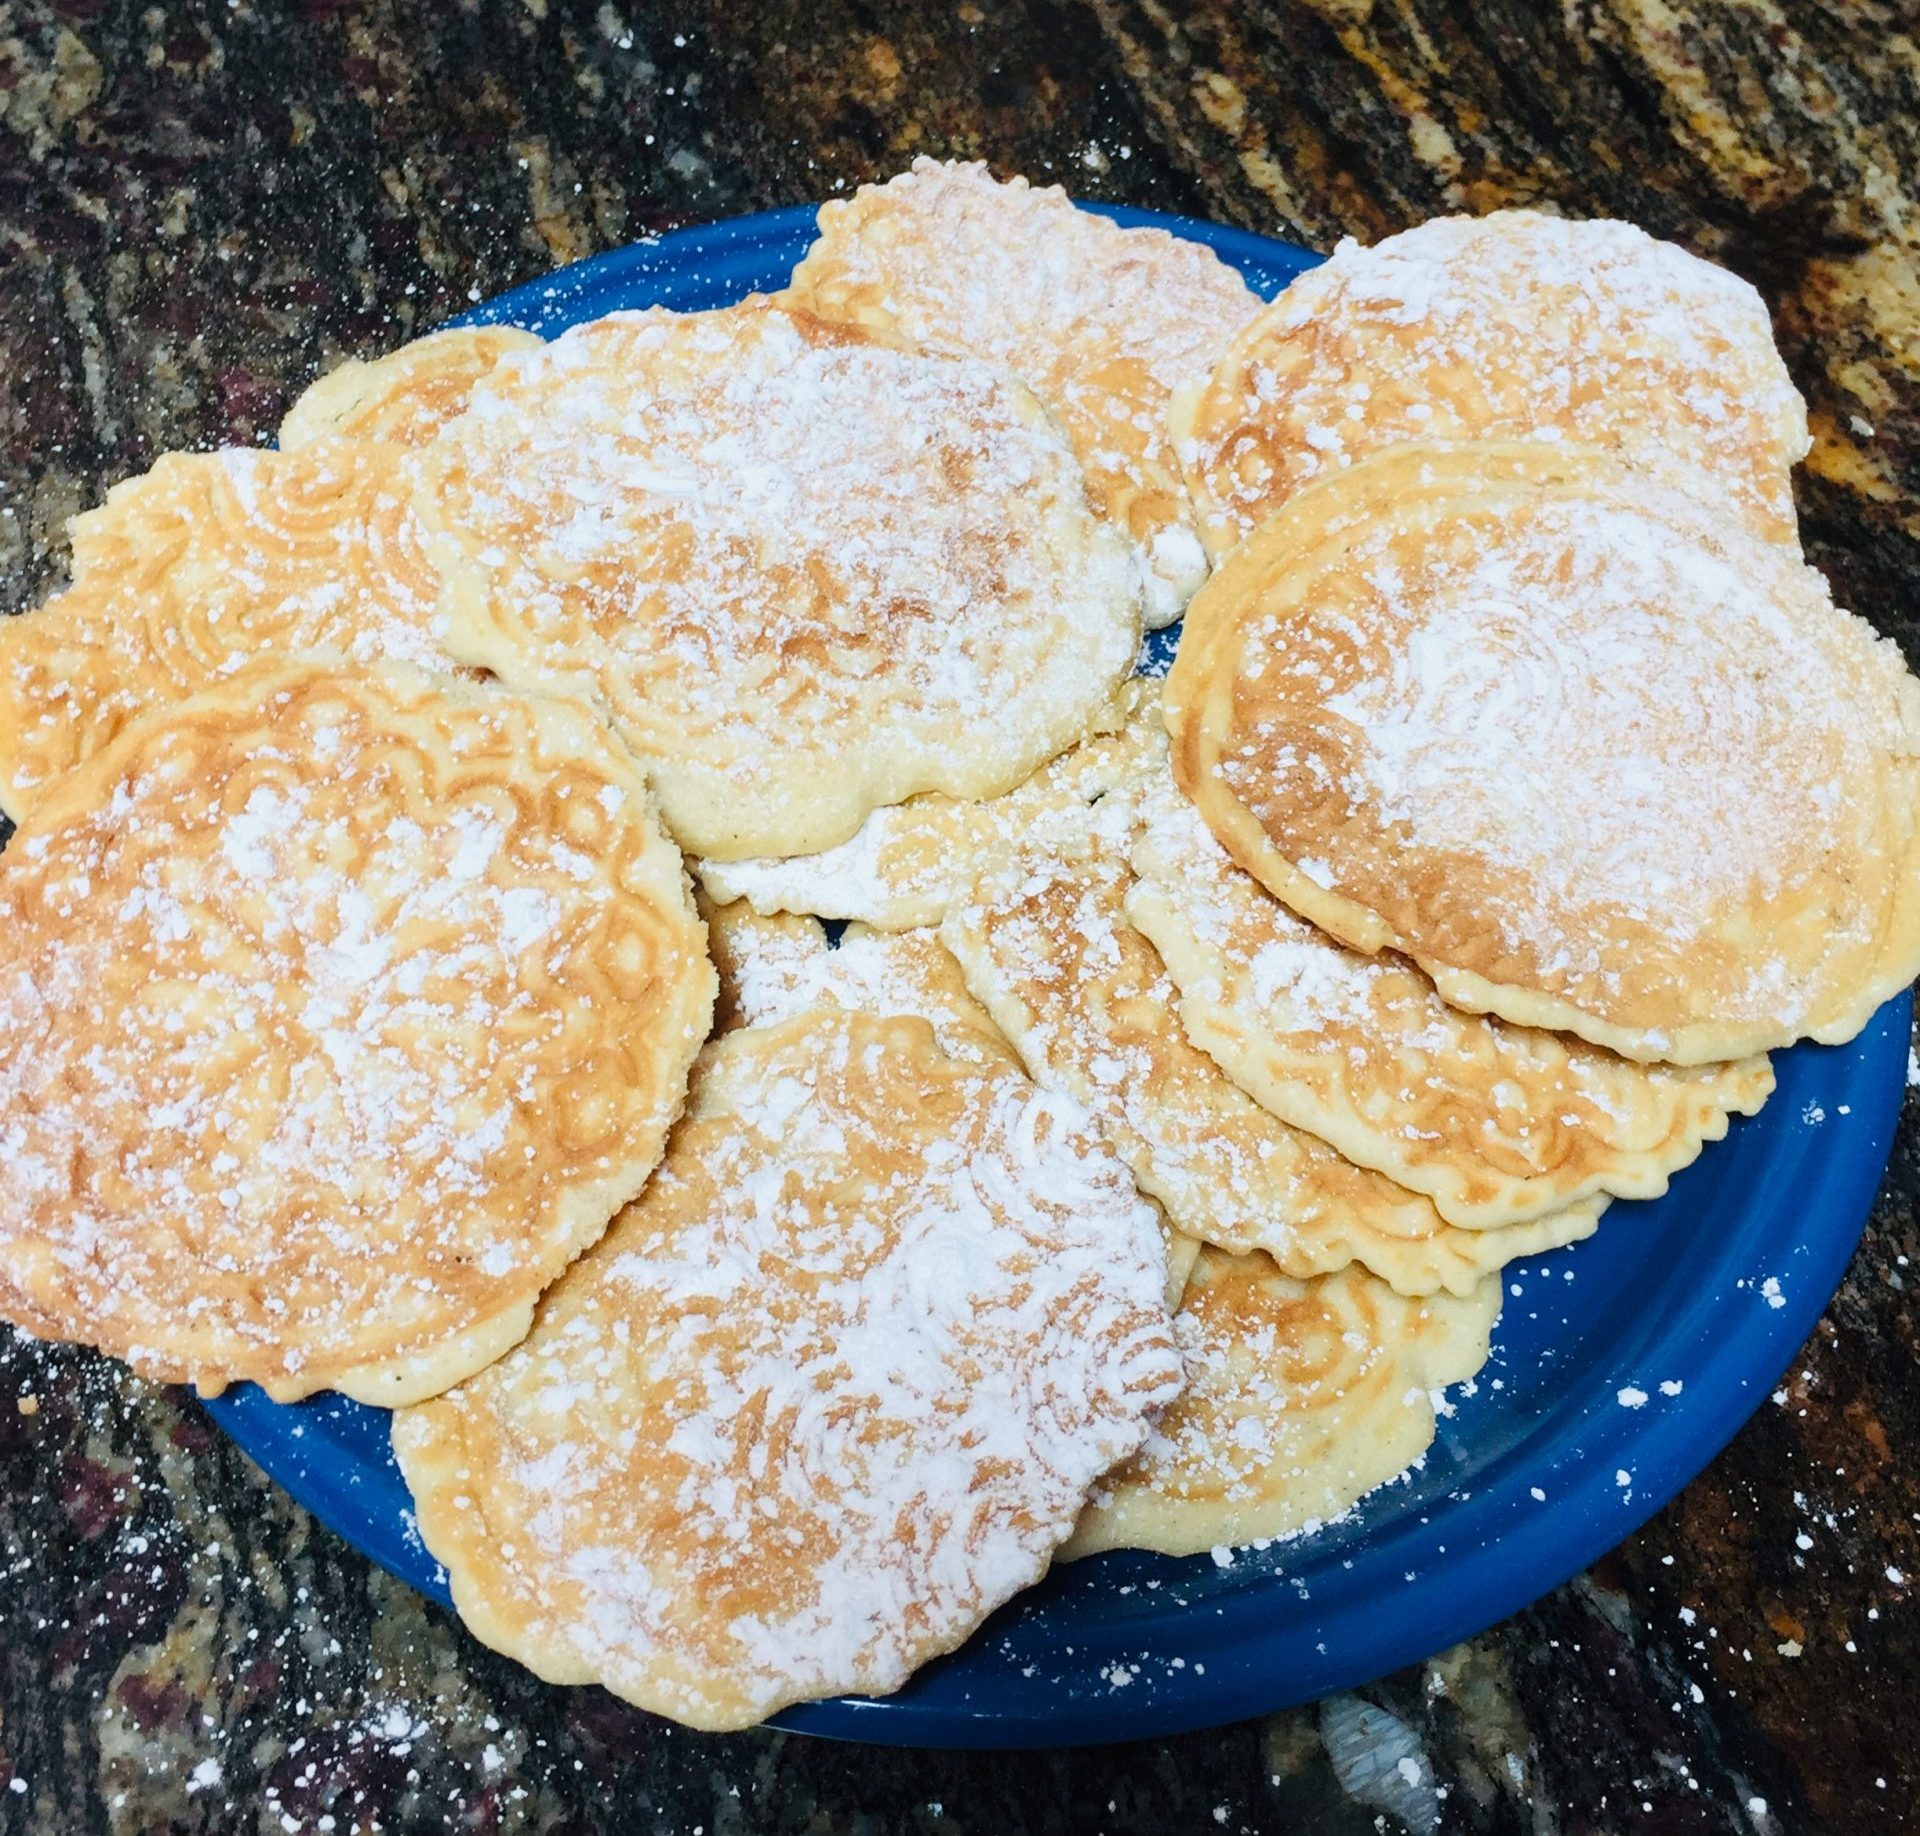 Pizzelles Recipe ~ Italian Waffle Cookies are Easy to Make